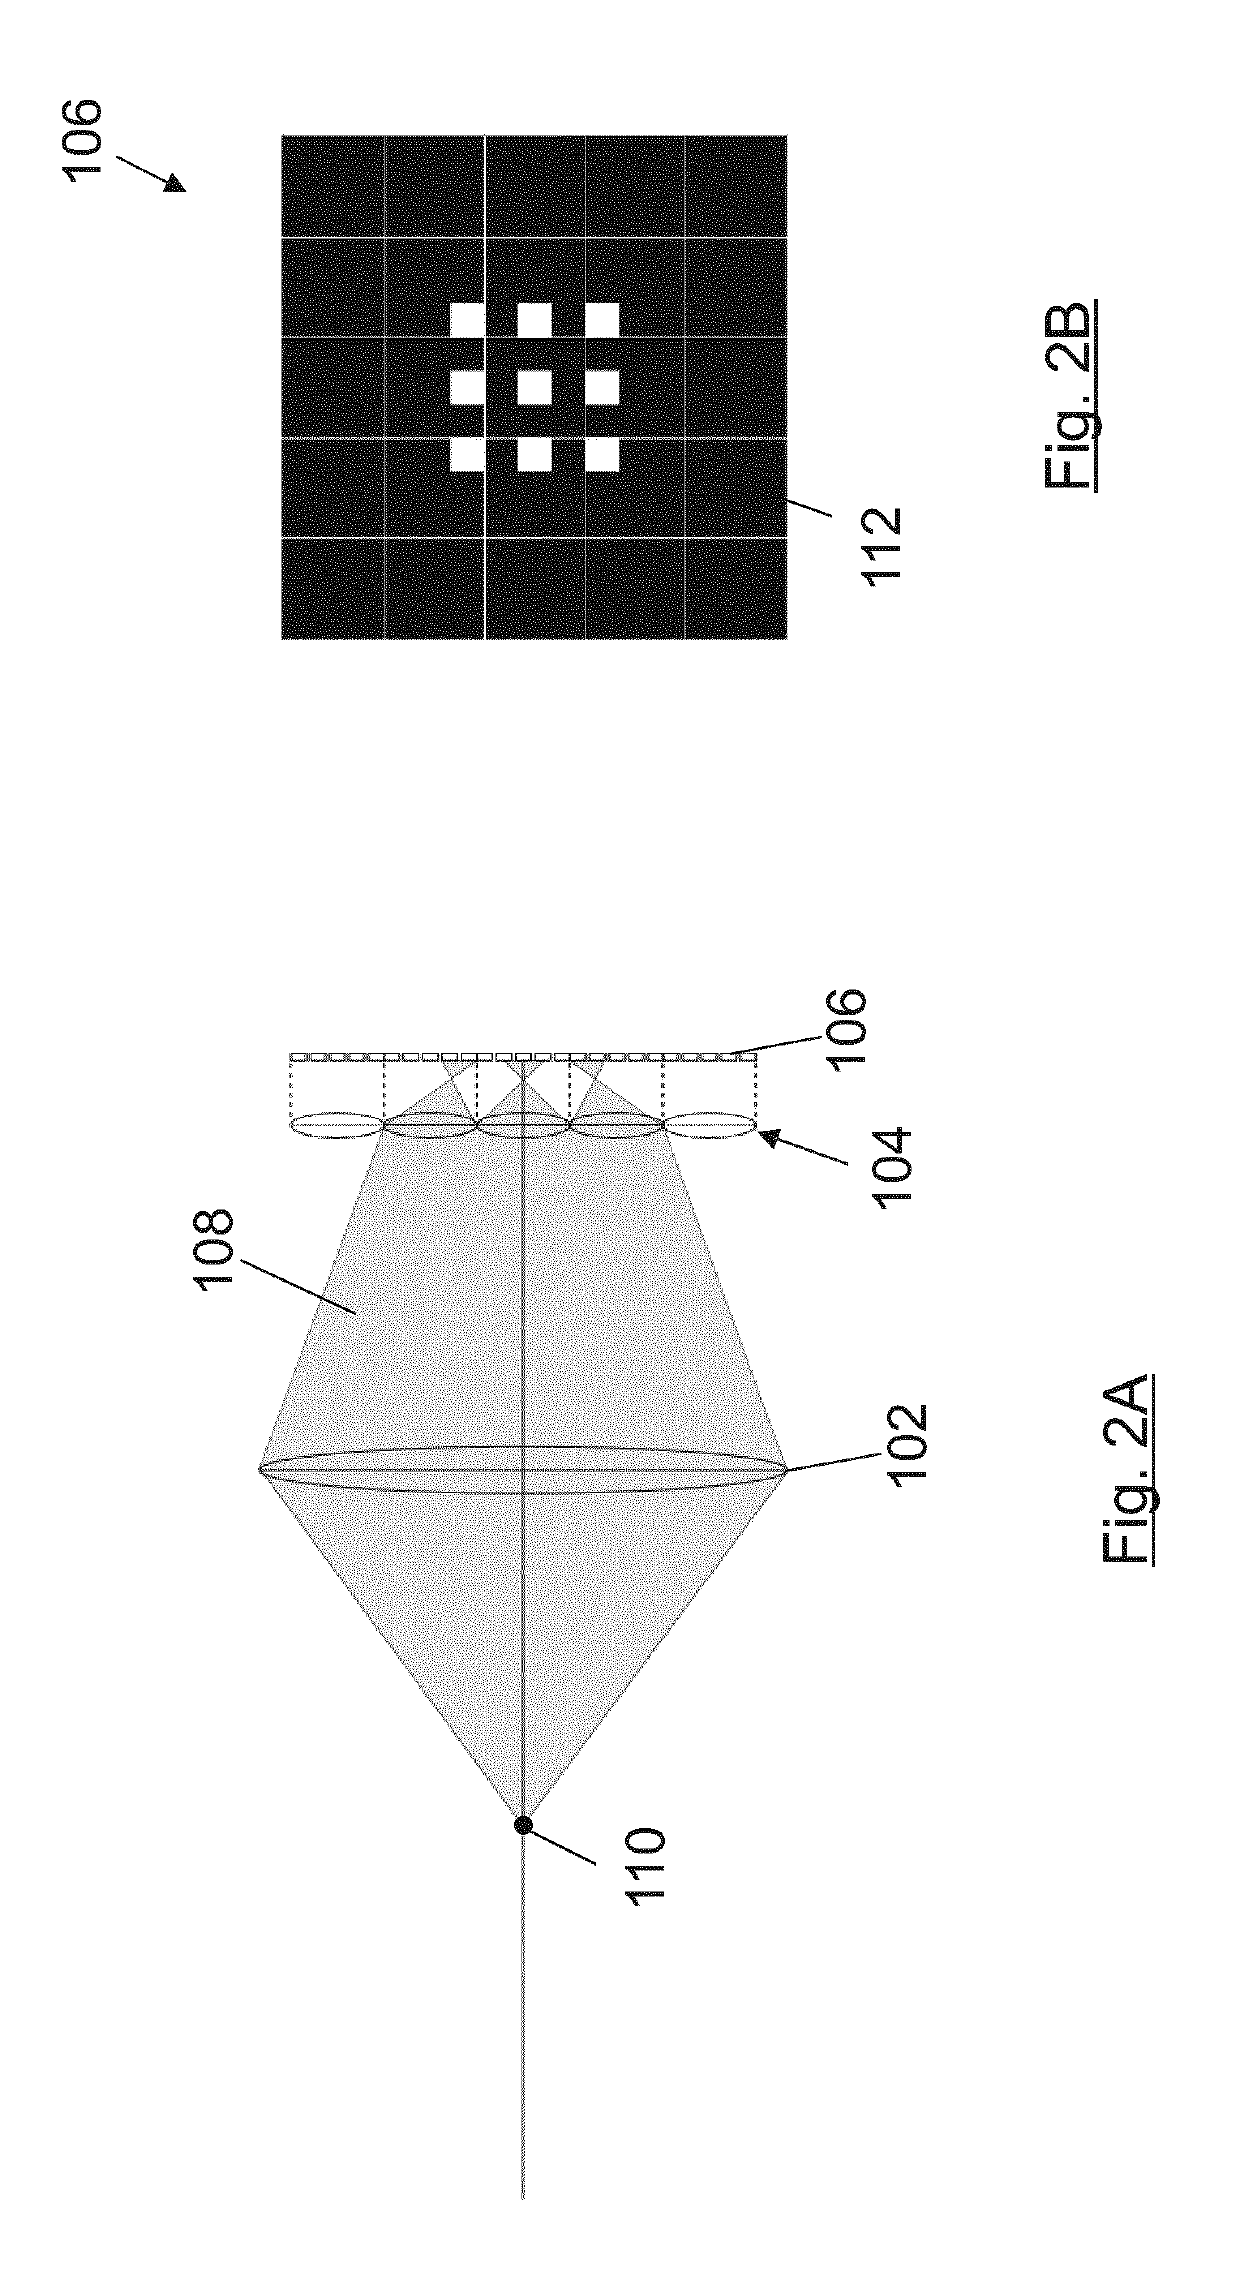 Device and method for obtaining distance information from views